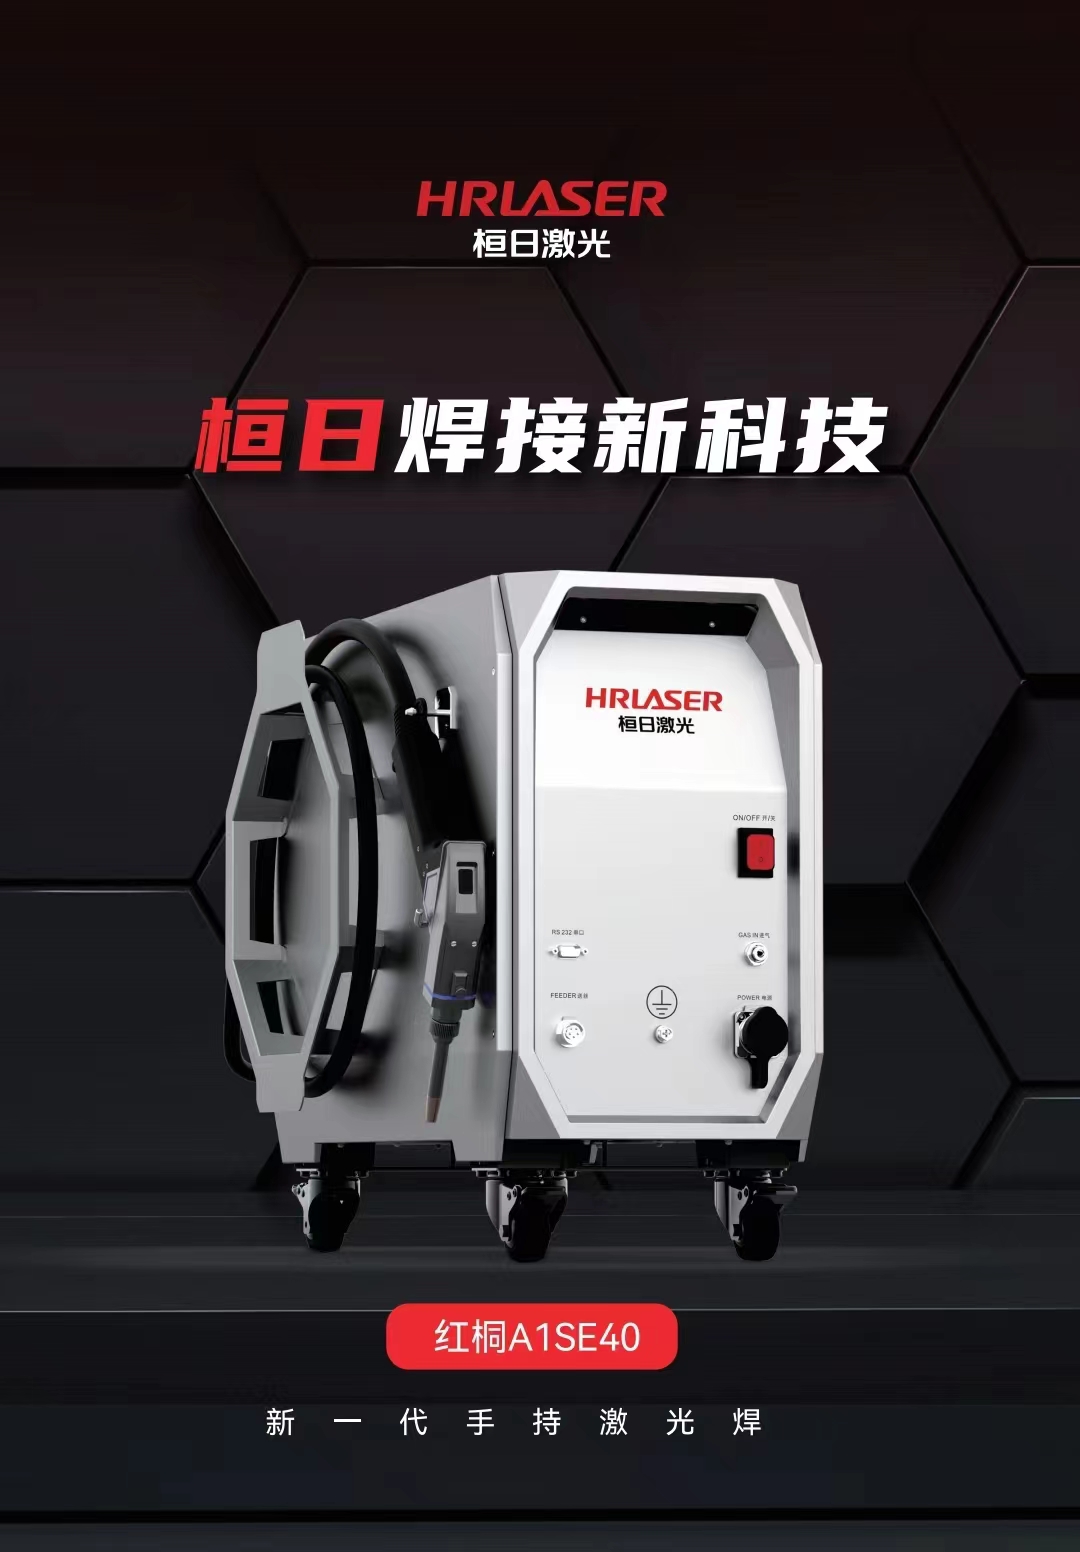 Portable Handheld 1200W/1.2kW Laser Welding Machine With Continuous Fiber Laser for Sale